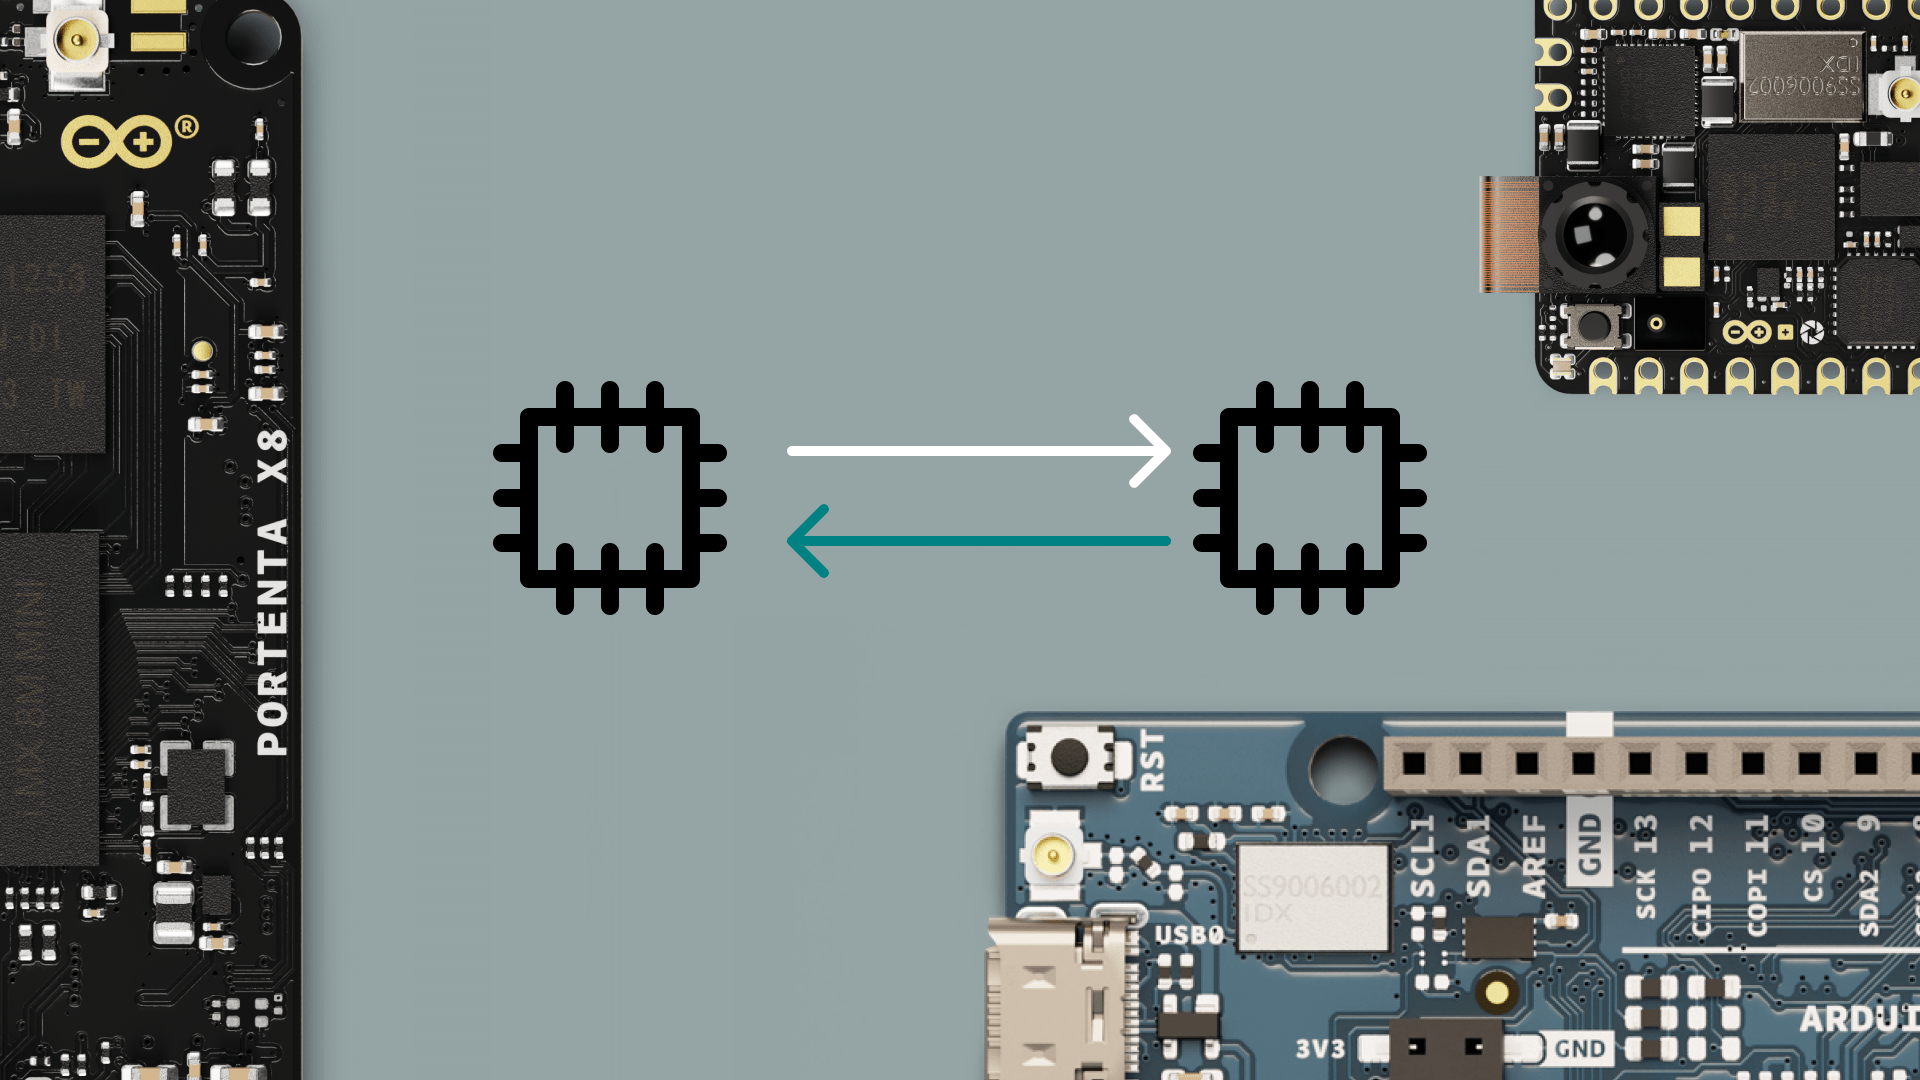 You can now run Arduino and MicroPython side-by-side on multi-core microcontrollers